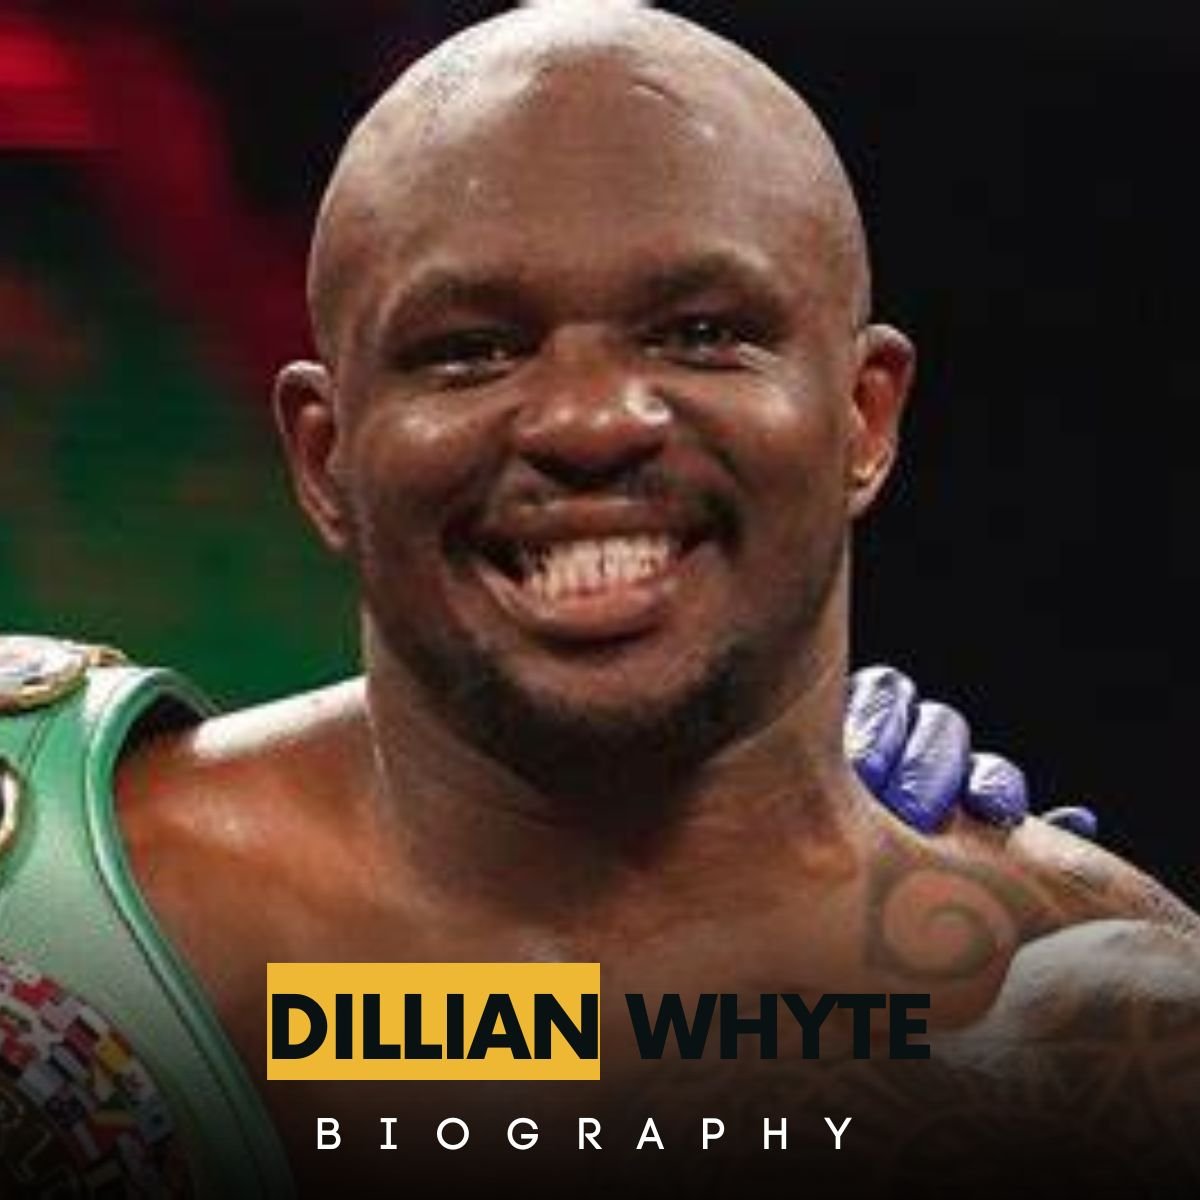 Who Is Dillian Whyte? – Getting To Know The World’s Young Father & Boxing Champion